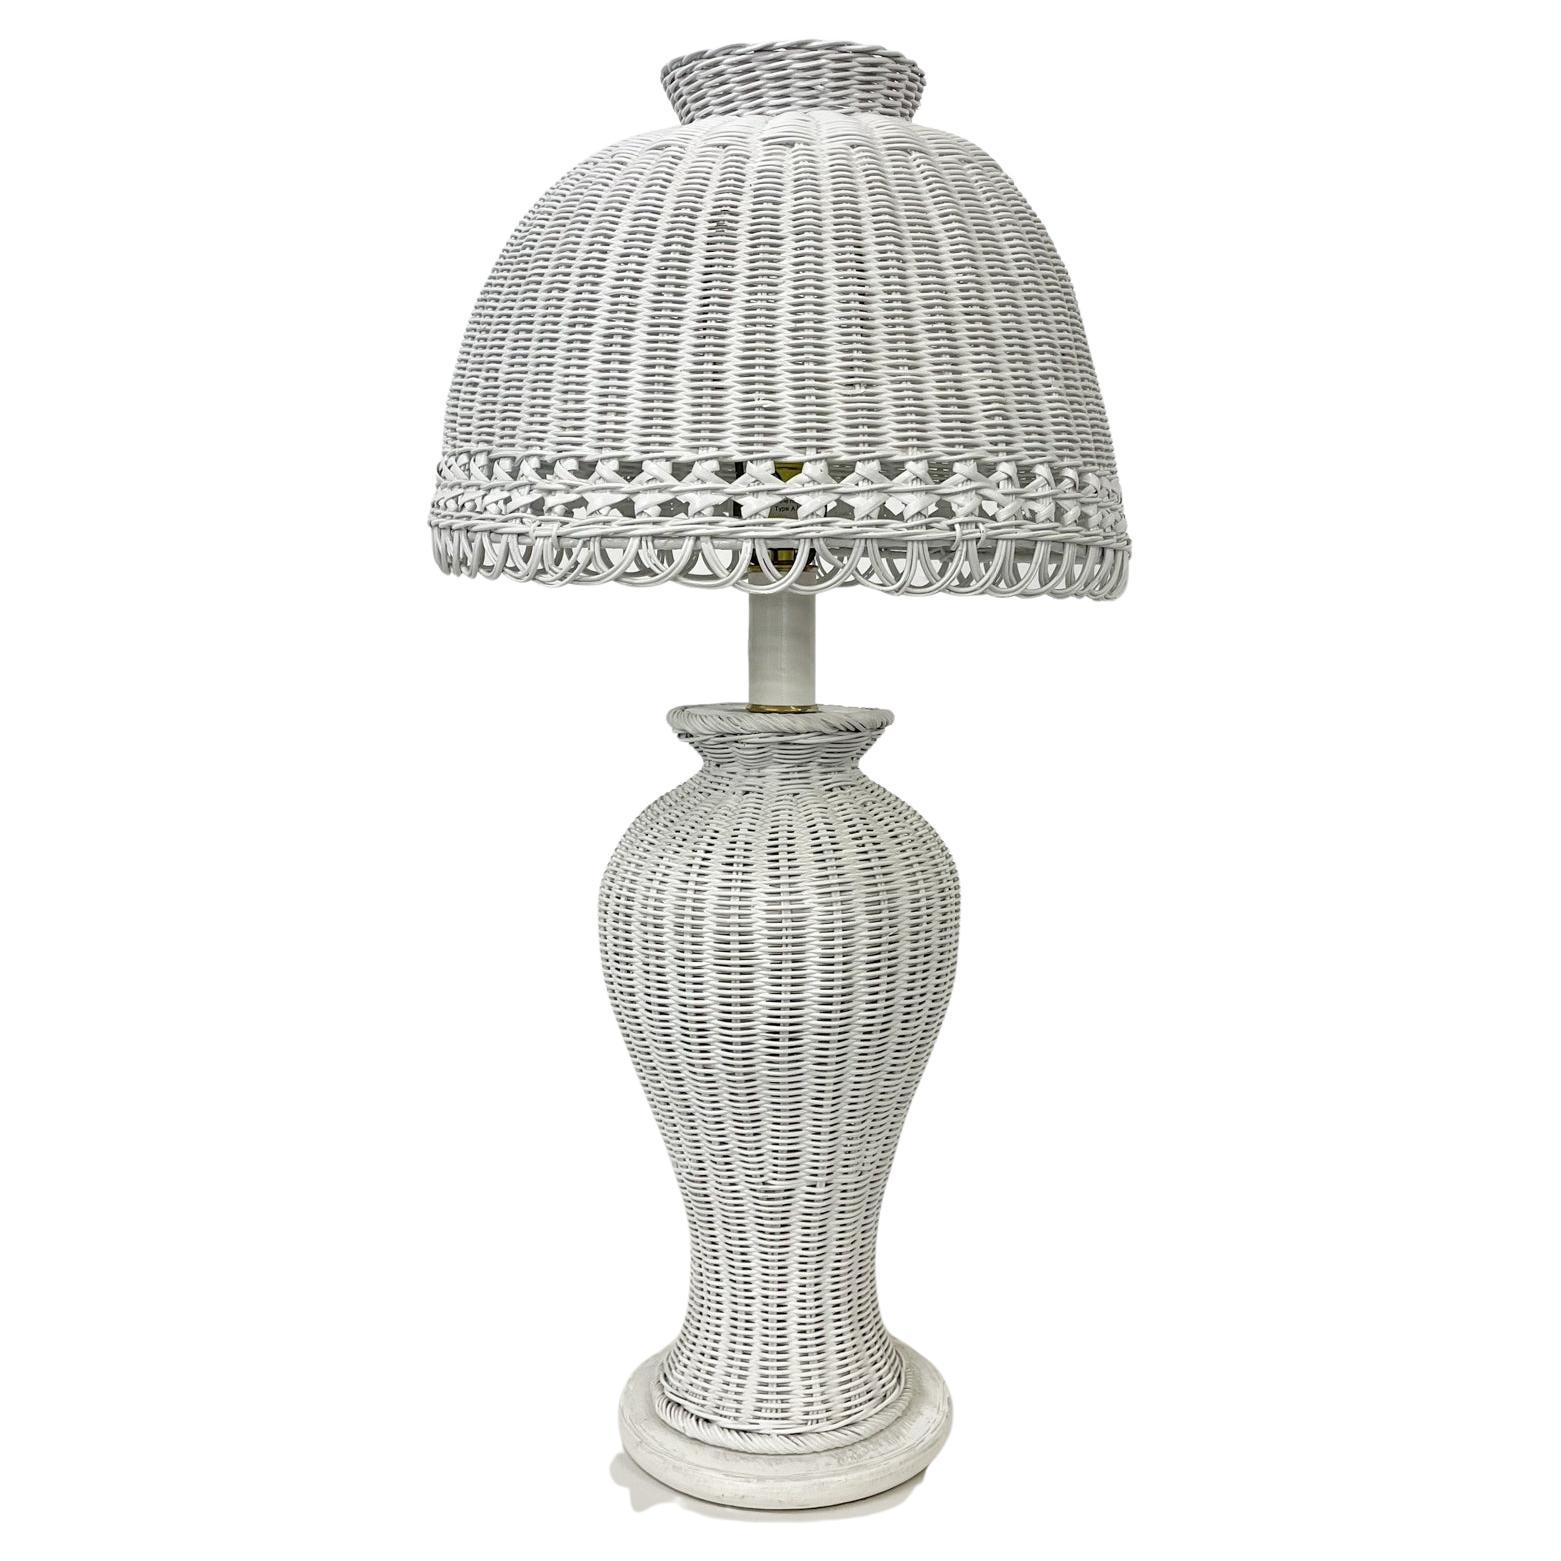 1970s Pretty Vintage White Wicker Sculptural Table Lamp Scalloped Dome Shade